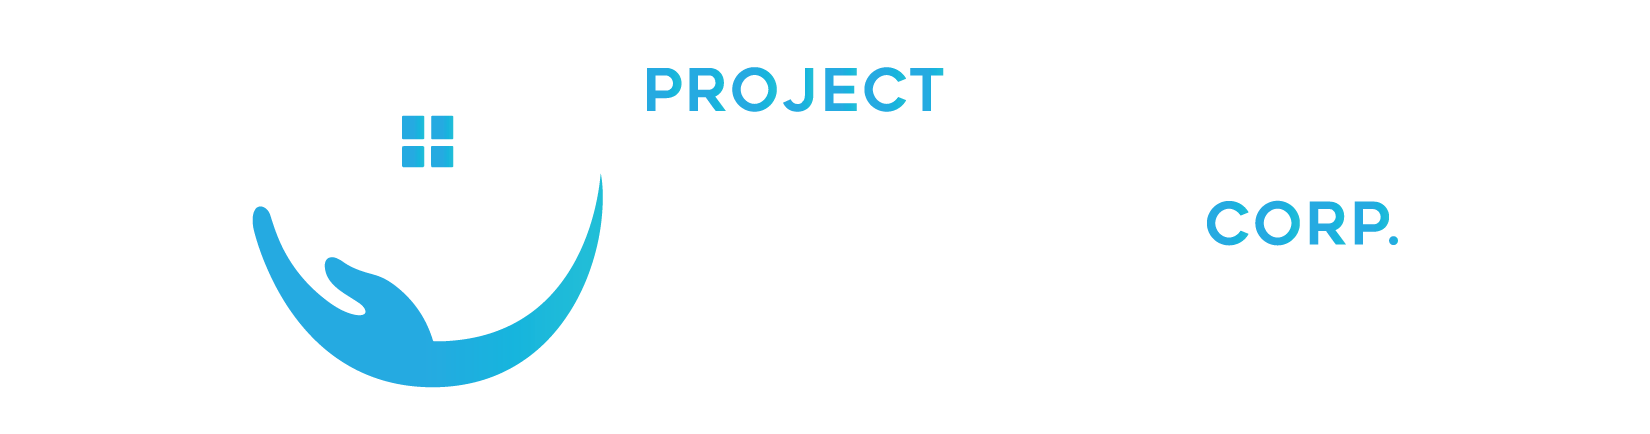 ProjectPRCorp 01